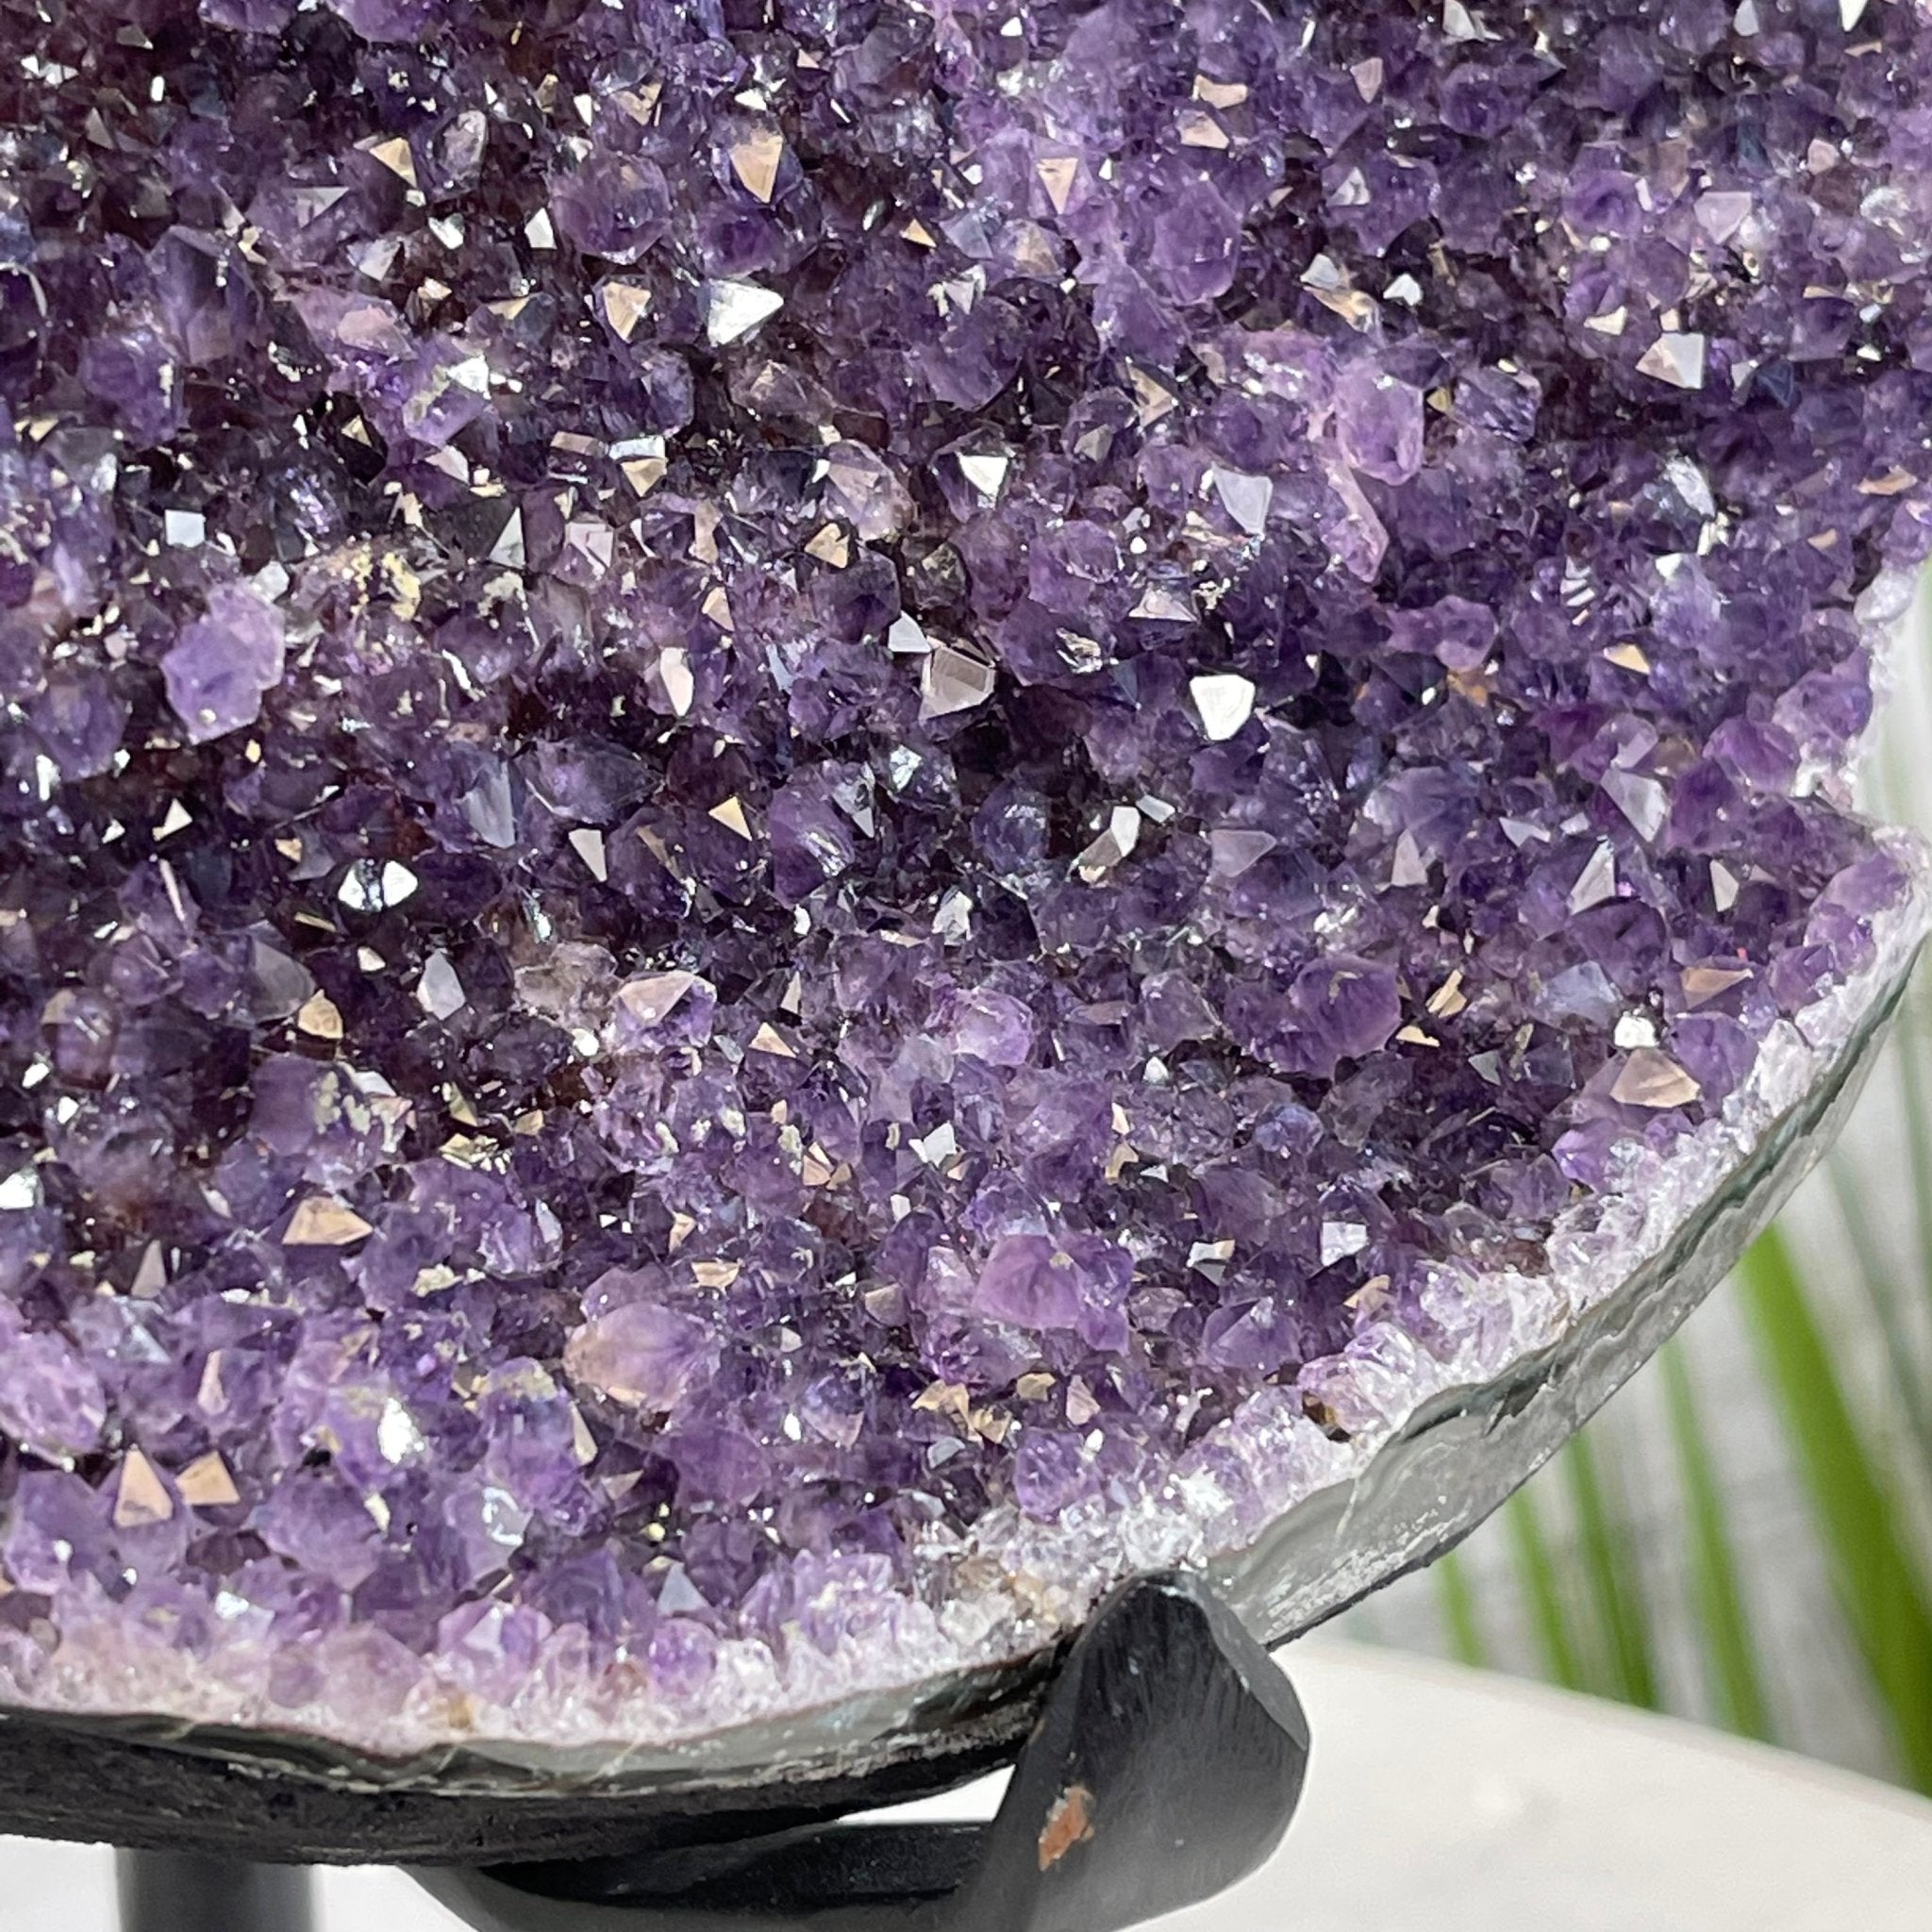 Extra Plus Quality Amethyst Druse Cluster on Metal Stand, 16.5 lbs & 12" tall #5491-0039 by Brazil Gems - Brazil GemsBrazil GemsExtra Plus Quality Amethyst Druse Cluster on Metal Stand, 16.5 lbs & 12" tall #5491-0039 by Brazil GemsClusters on Fixed Bases5491-0039